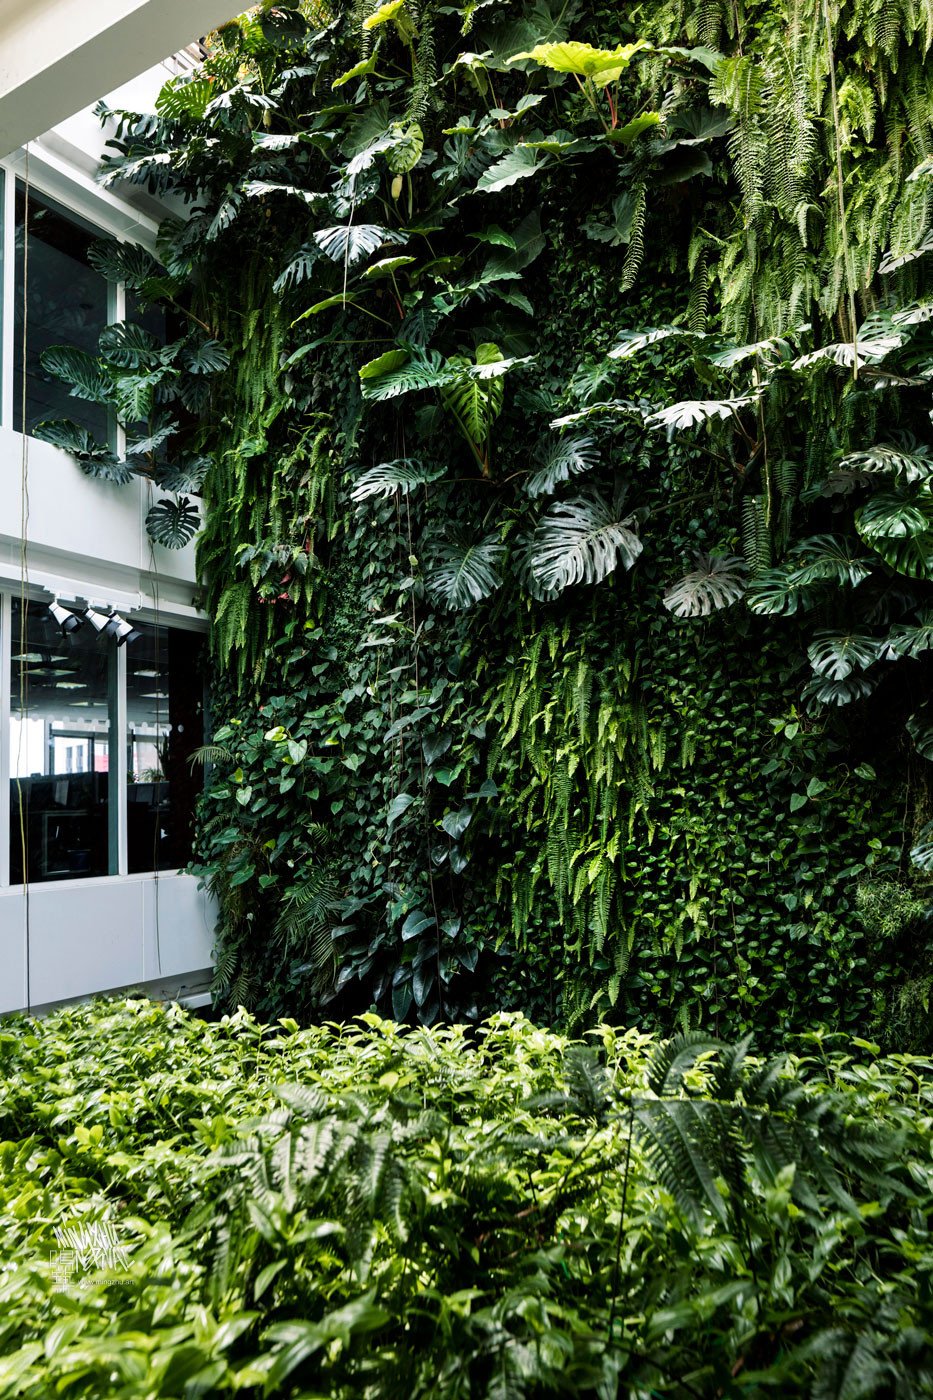 Mingzhu Nerval vertical living wall experts created the best garden design art at Clariant in Shanghai, 2010